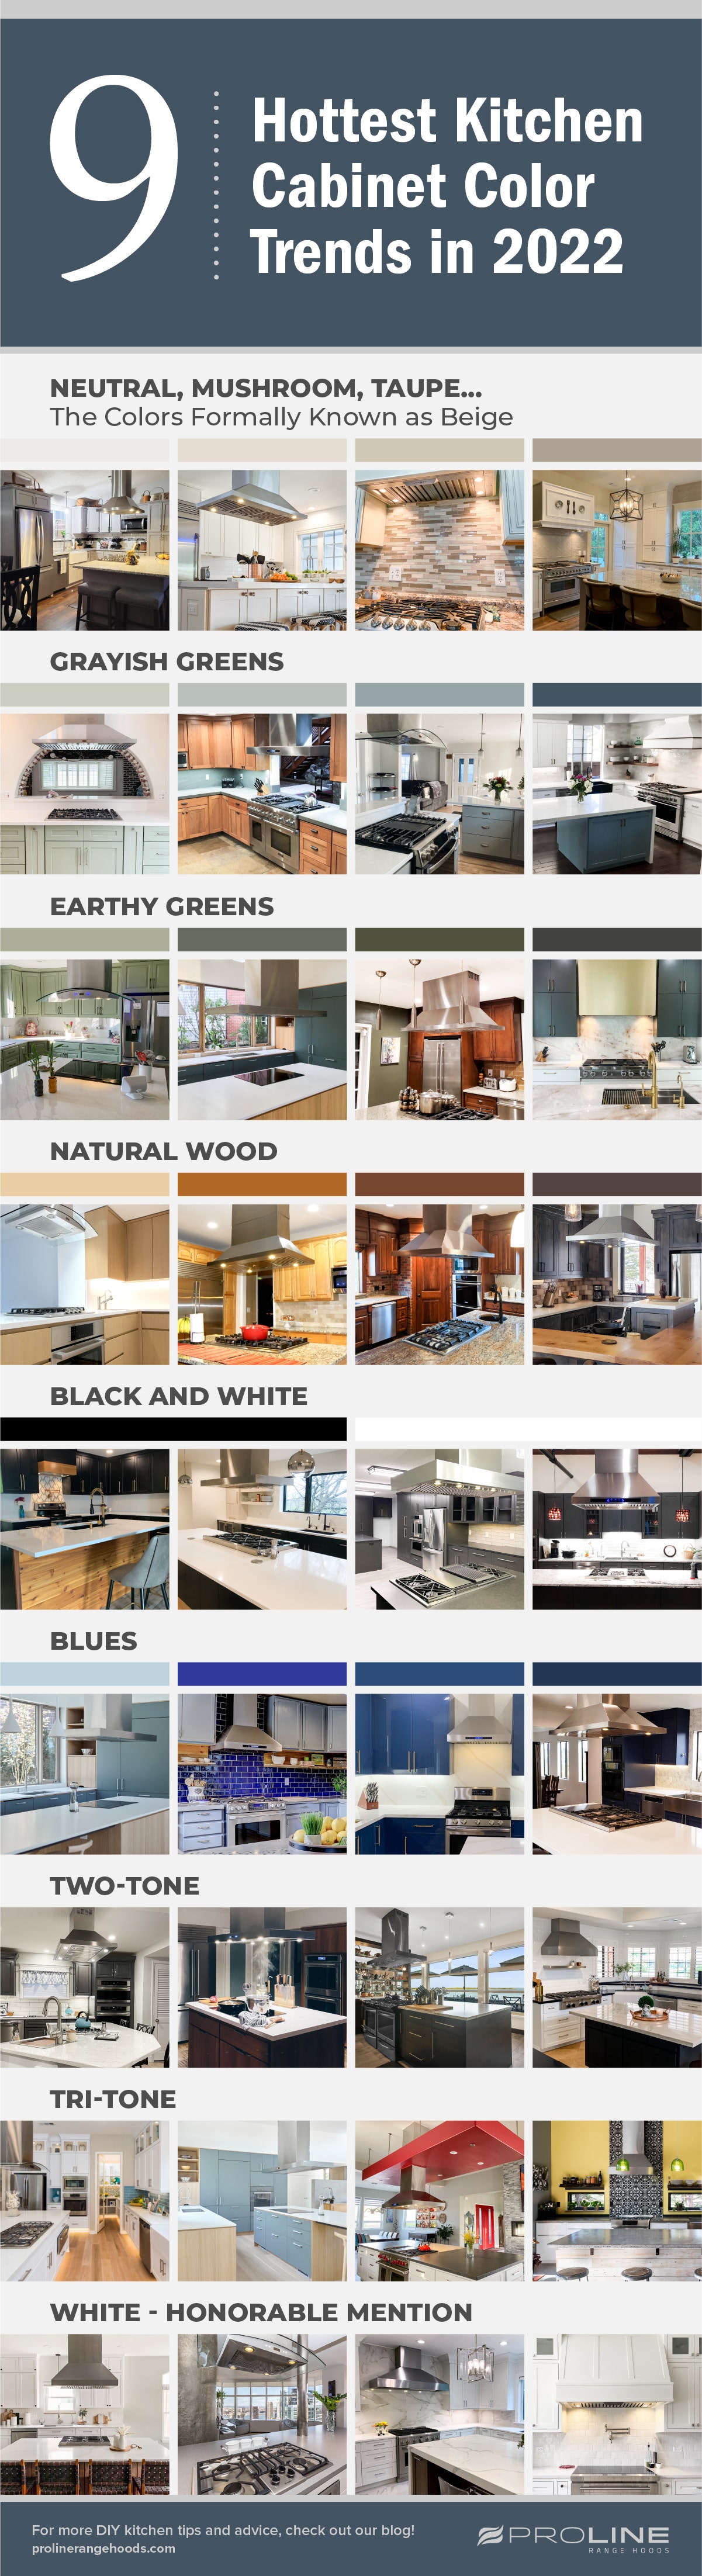 9 Hottest Kitchen Cabinet Color Trends in 2022